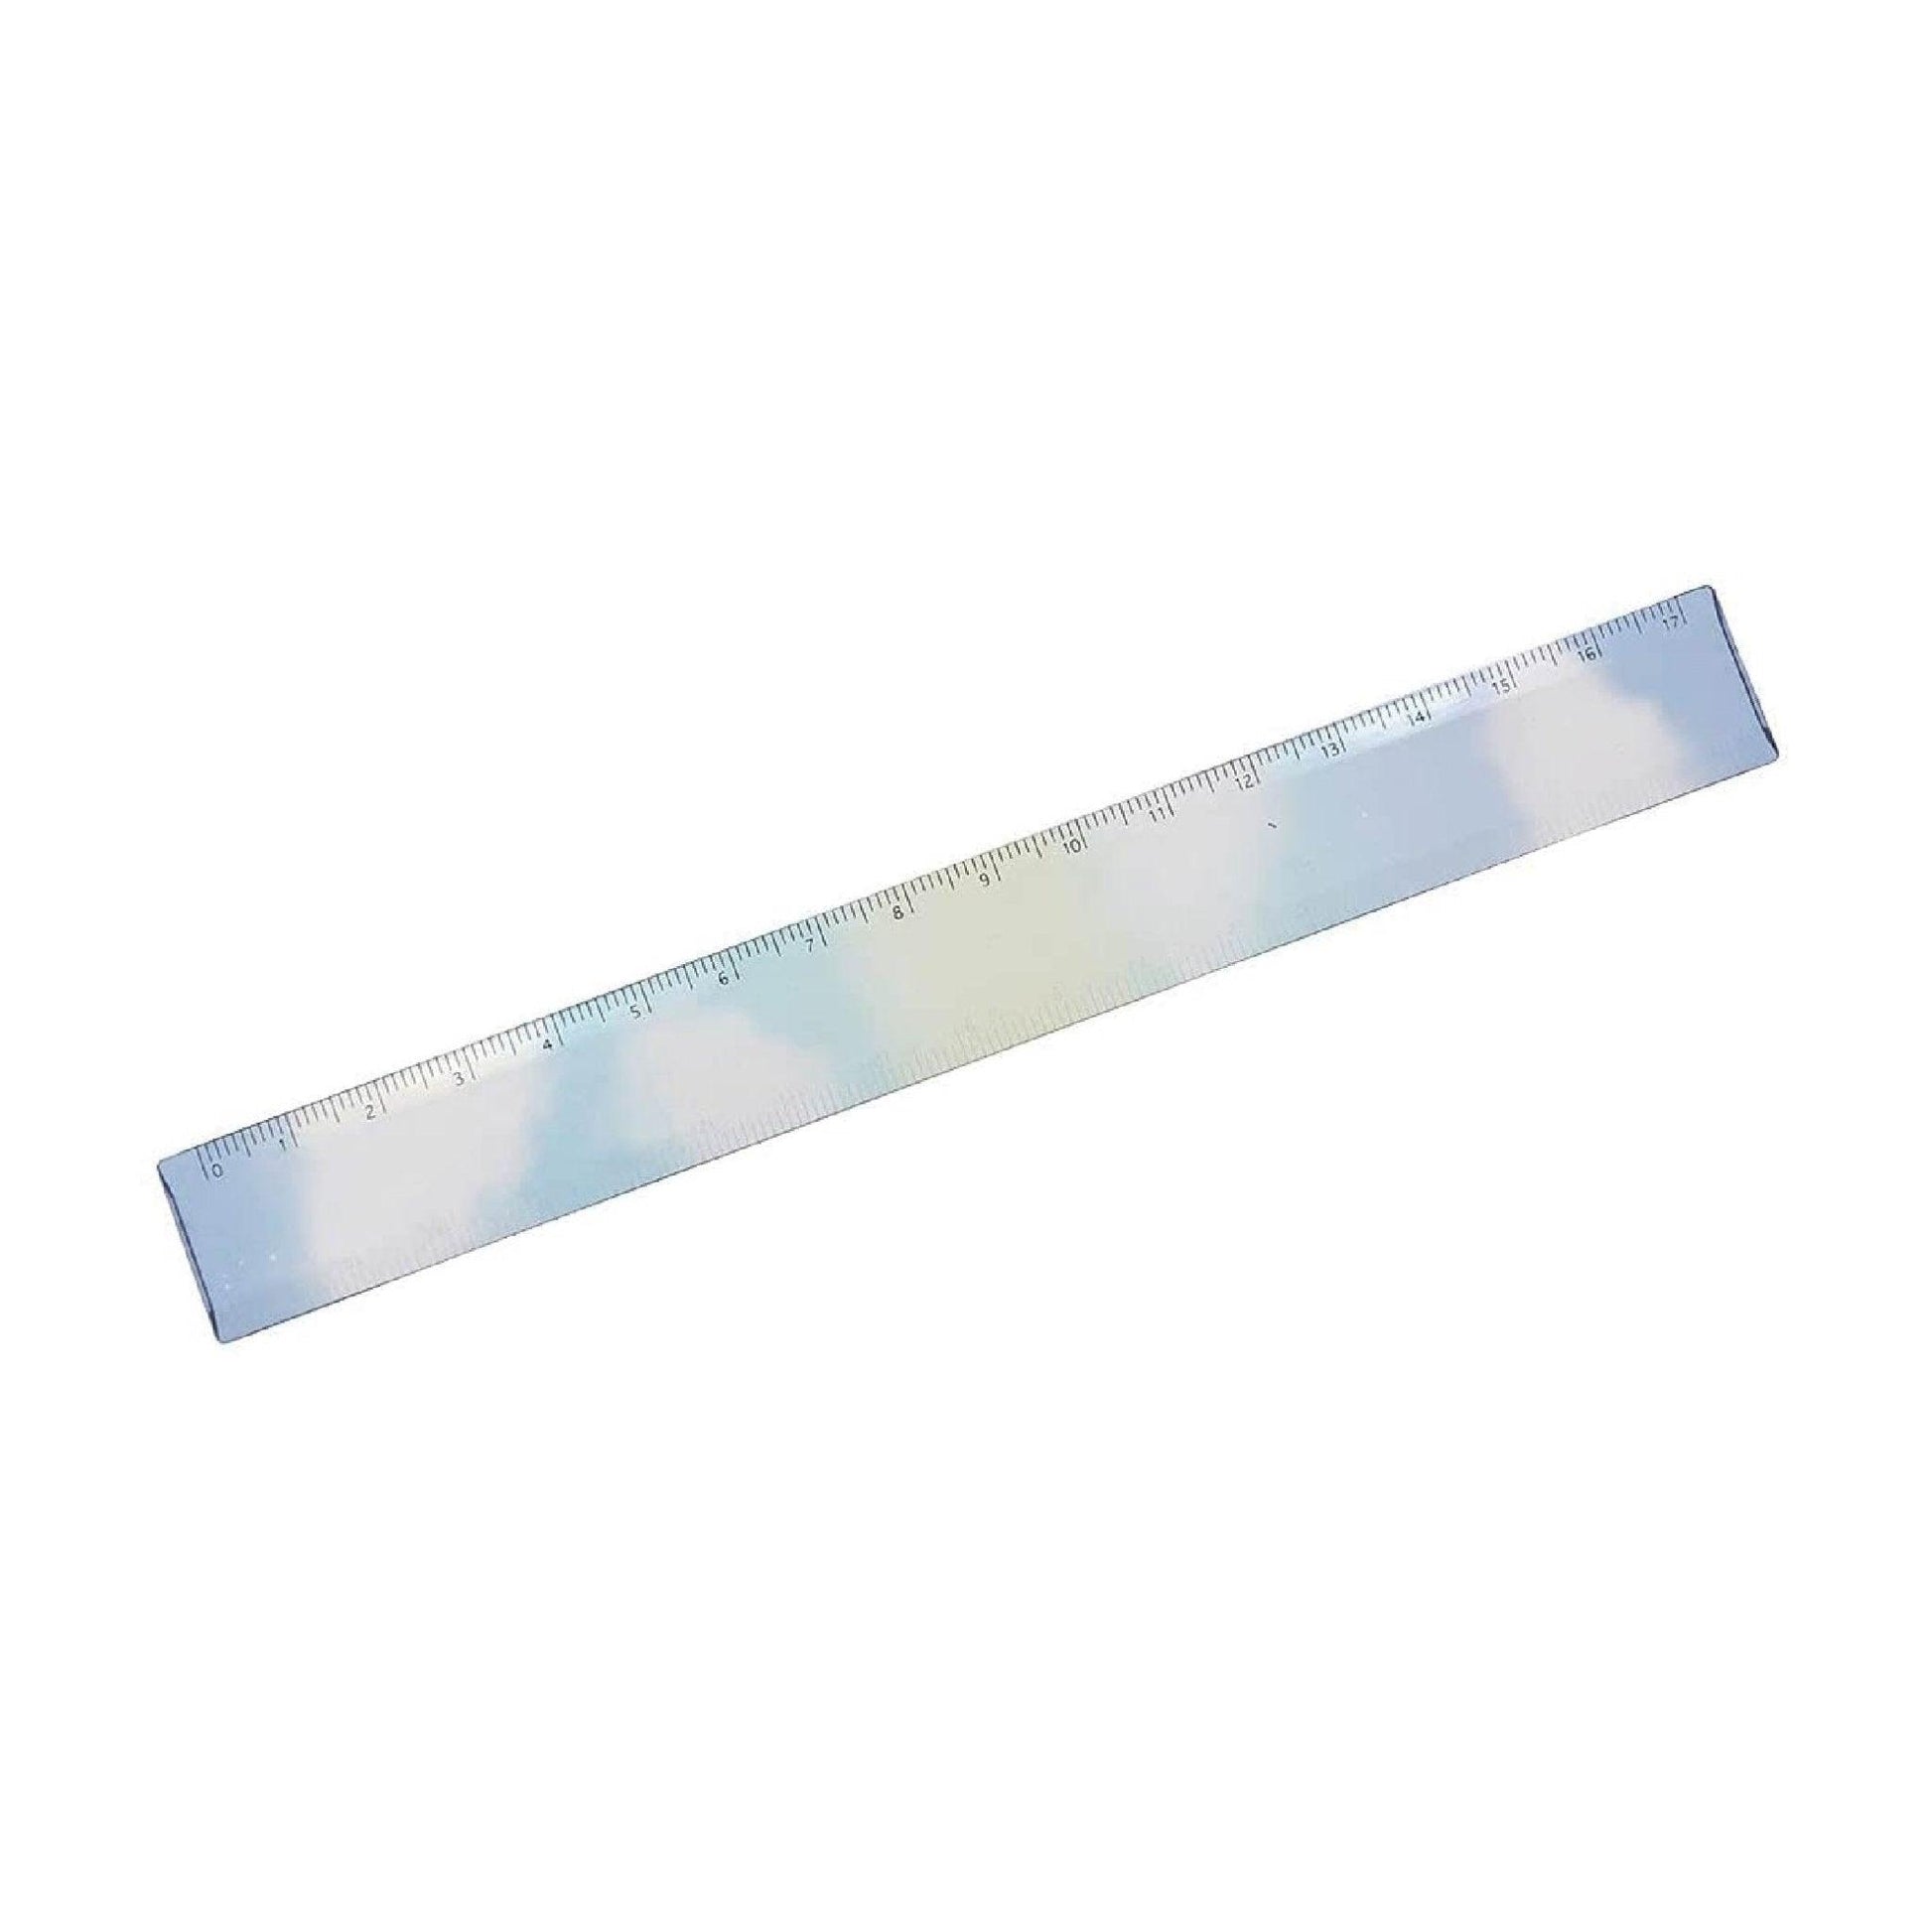 CRUX 17 cm ruler cutting ruler cone ruler modeling ruler rendering color colorful clouds blue sky and white clouds - CHL-STORE 